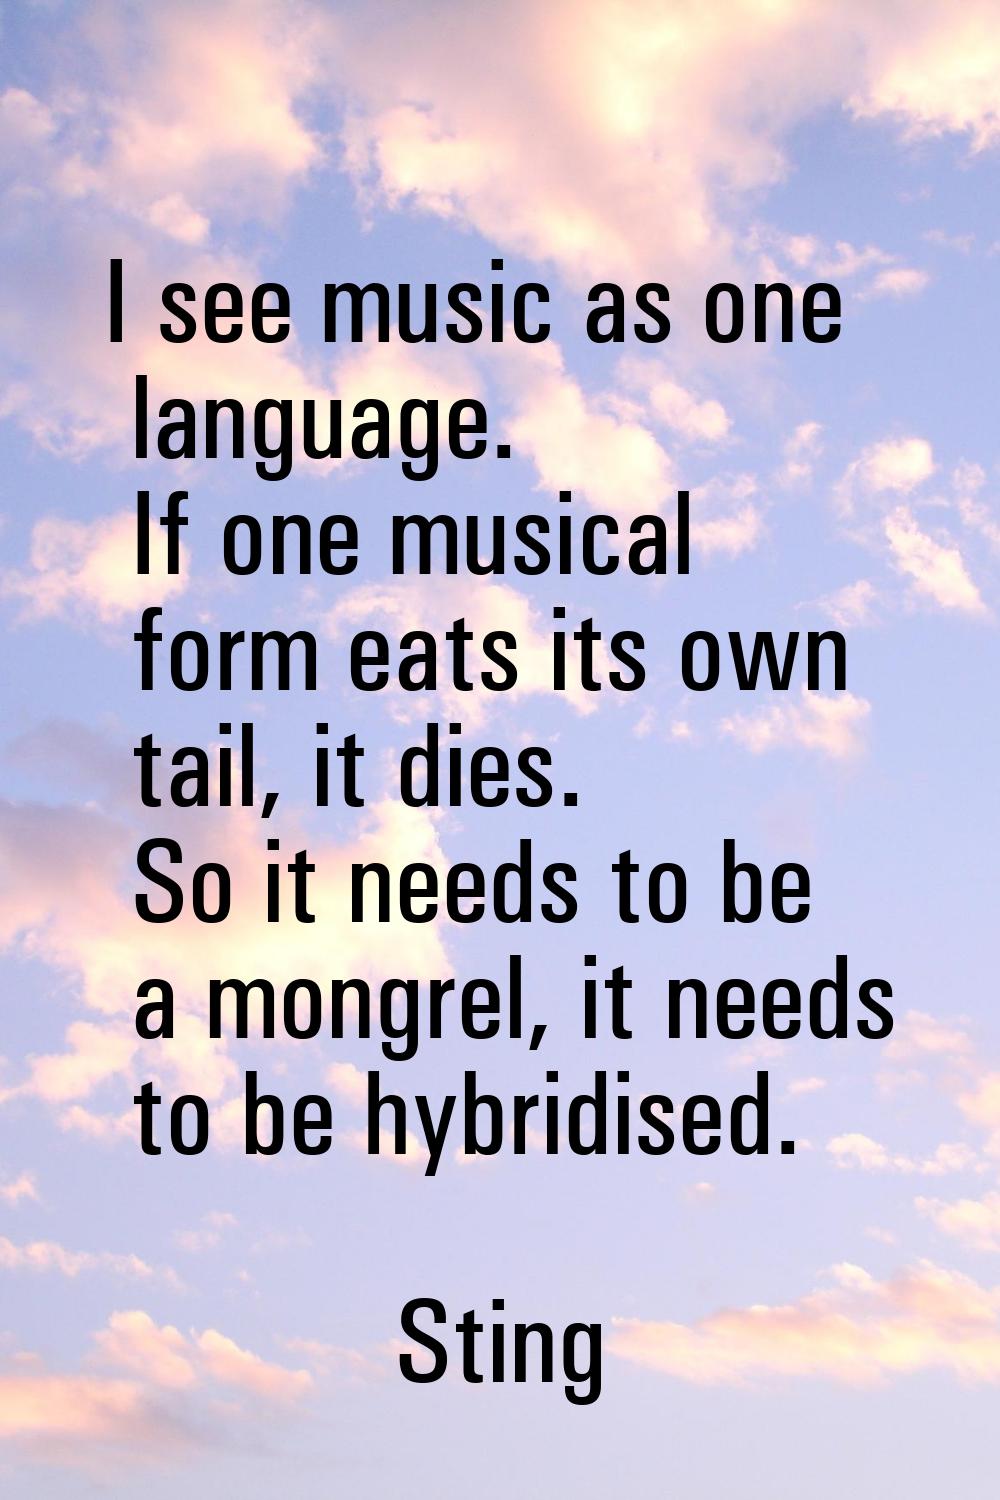 I see music as one language. If one musical form eats its own tail, it dies. So it needs to be a mo